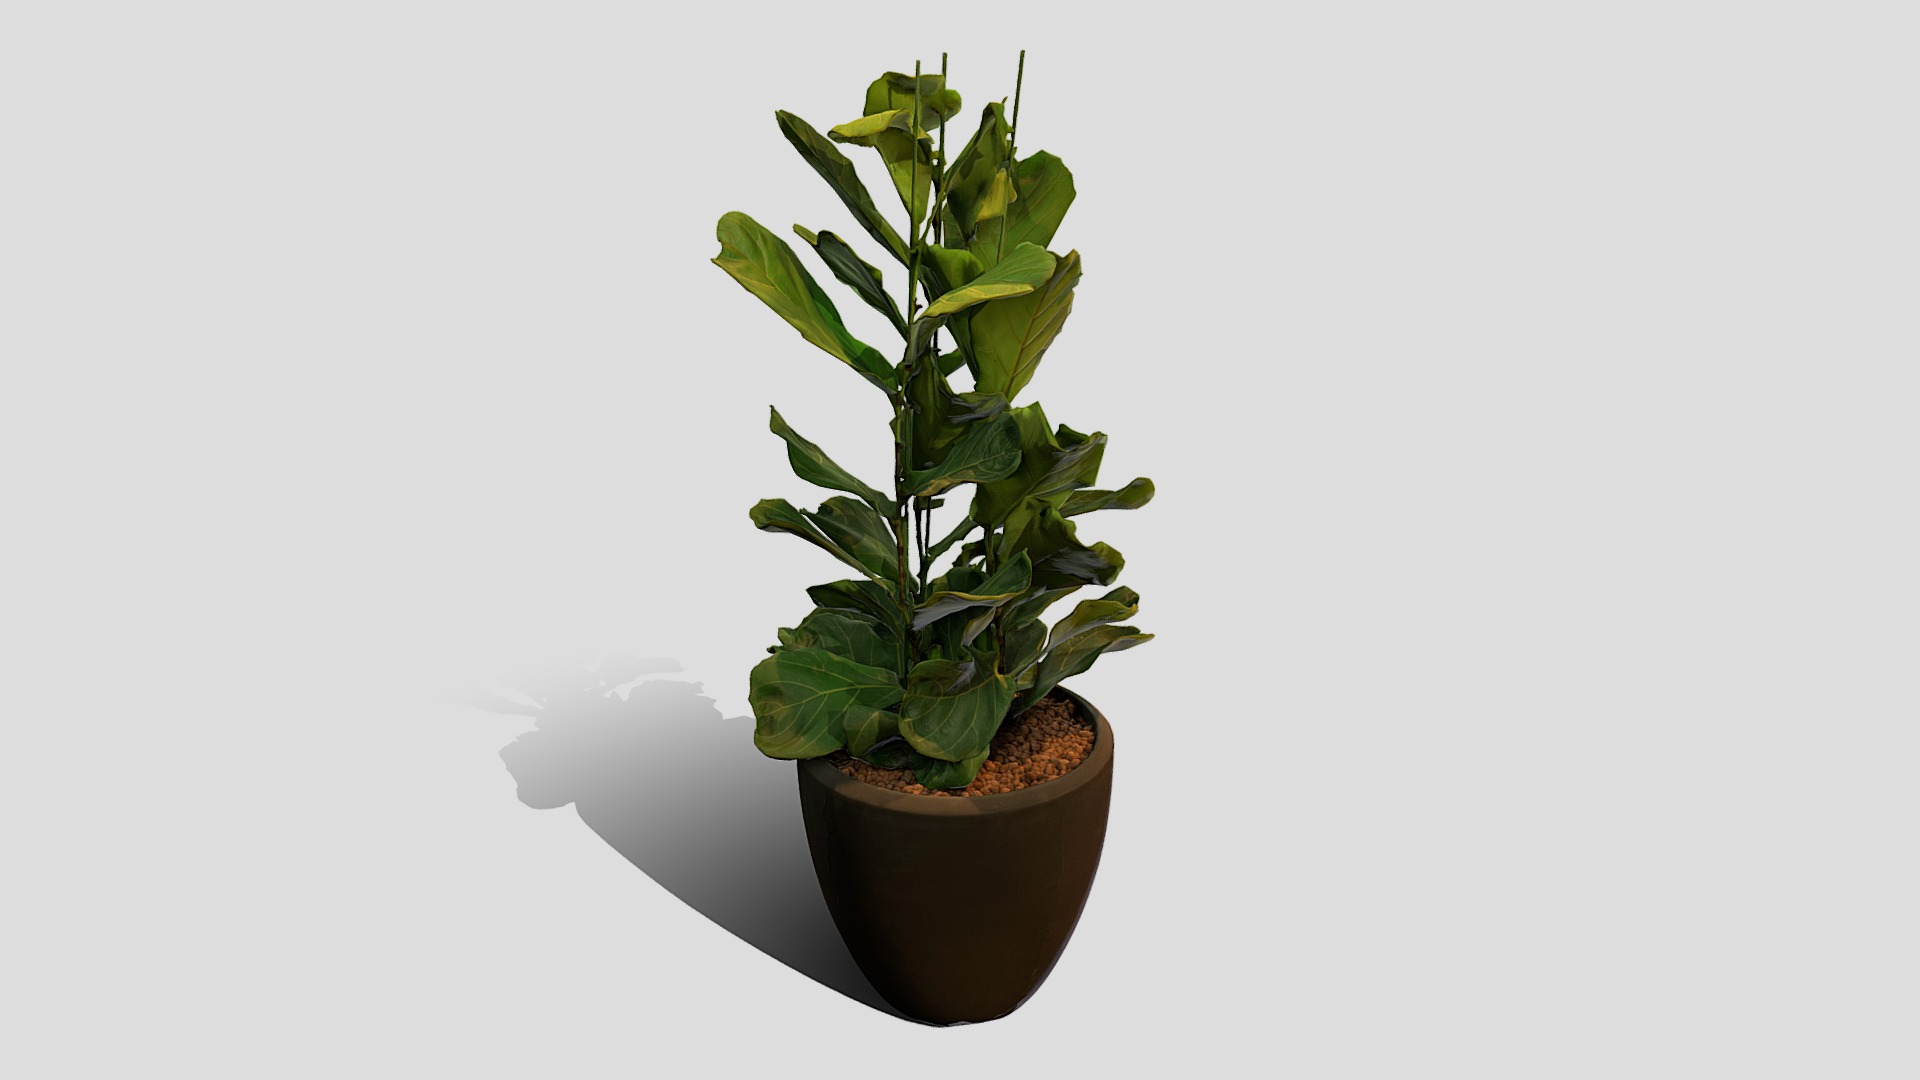 3D model Plant 3 - This is a 3D model of the Plant 3. The 3D model is about a potted plant on a white surface.